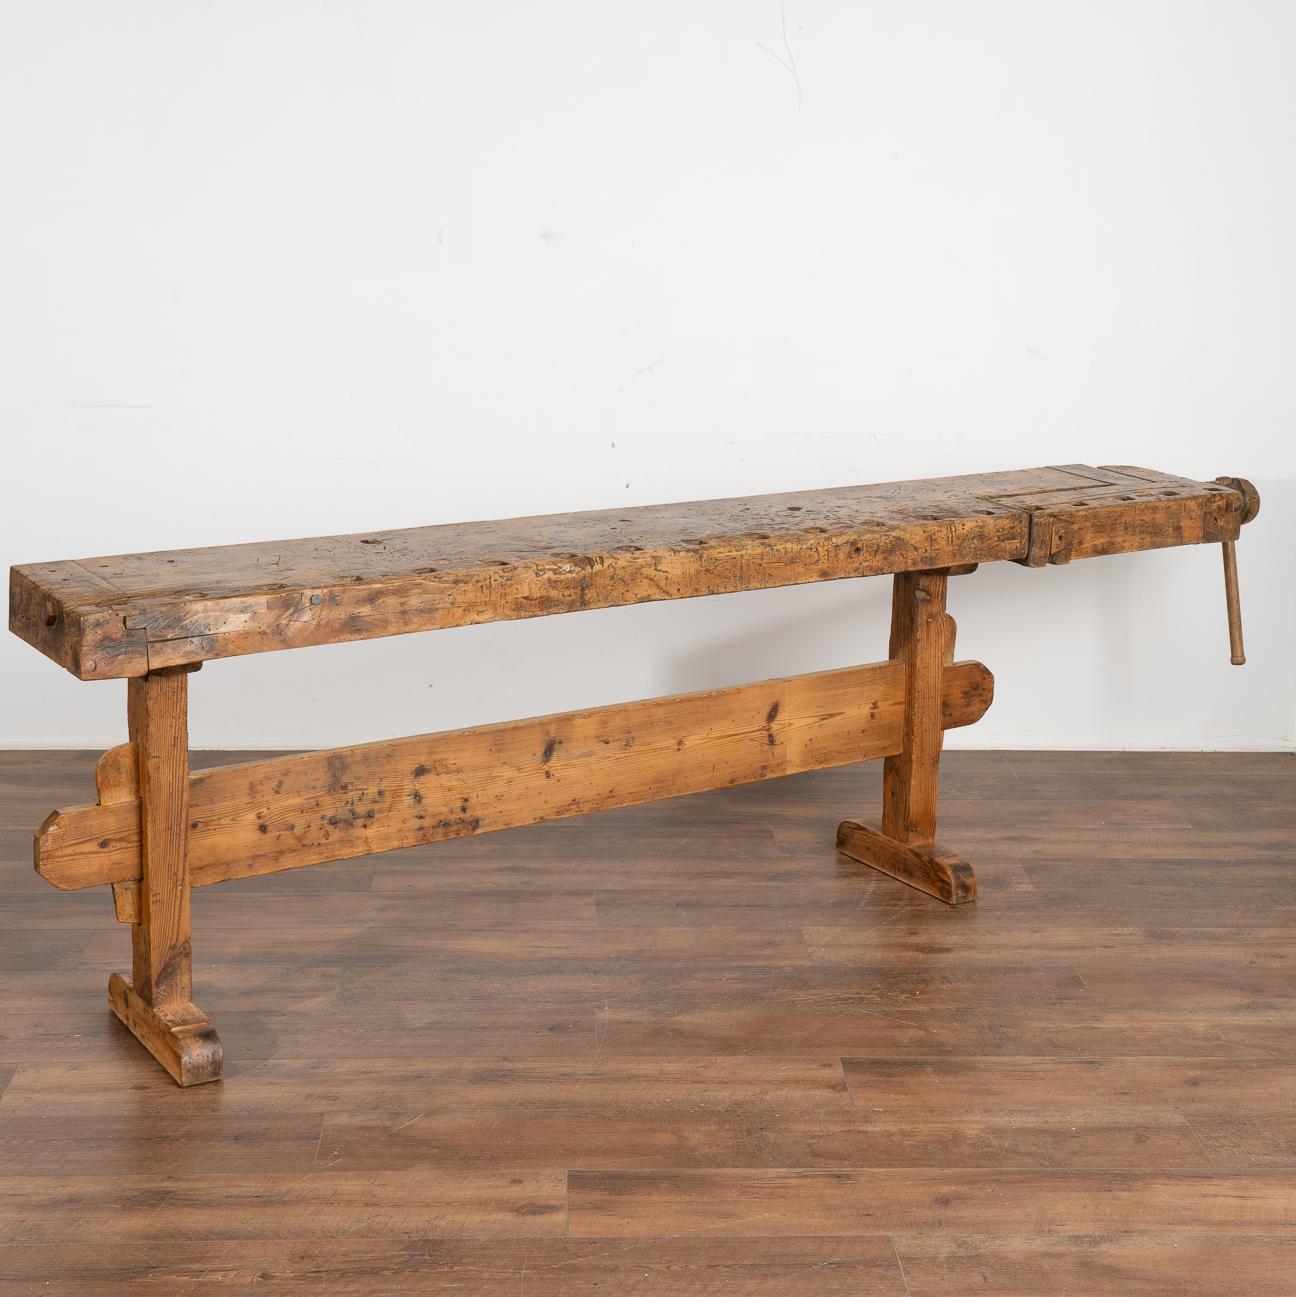 The dark patina of this old carpenter's workbench is a reflection of its age and years of use. Every ding, scratch, gouge and stain enrich its character and appeal.
This rustic work table is narrow, at only 13